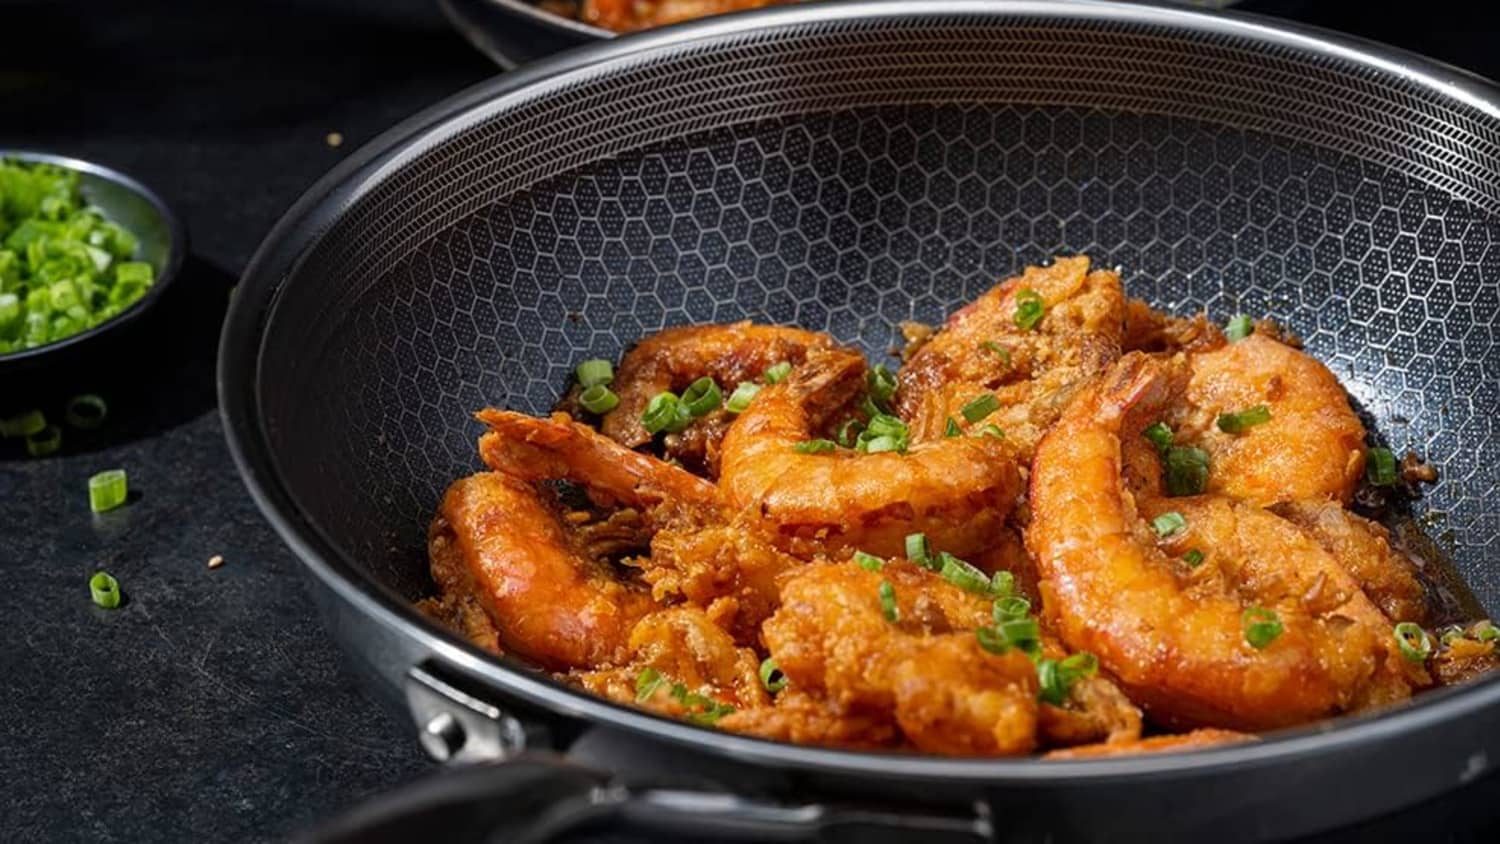 HexClad Review: Dutch Oven, Chicken Fryer, & Griddle Pan Tested